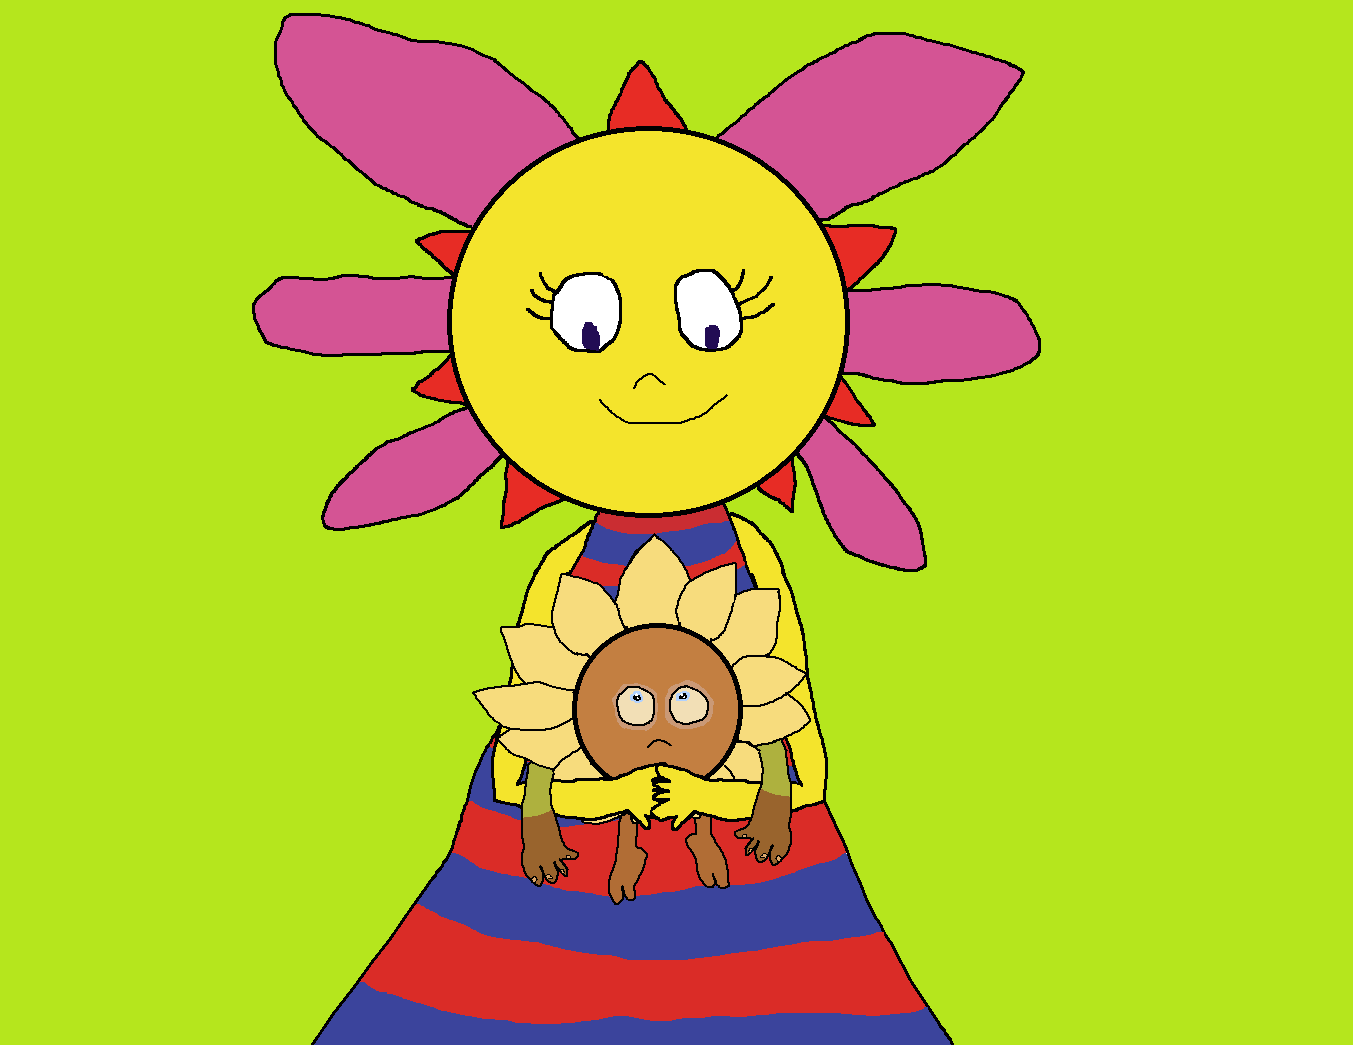 Isabelle's Blog world of toy: Sunny funny and the baby monster